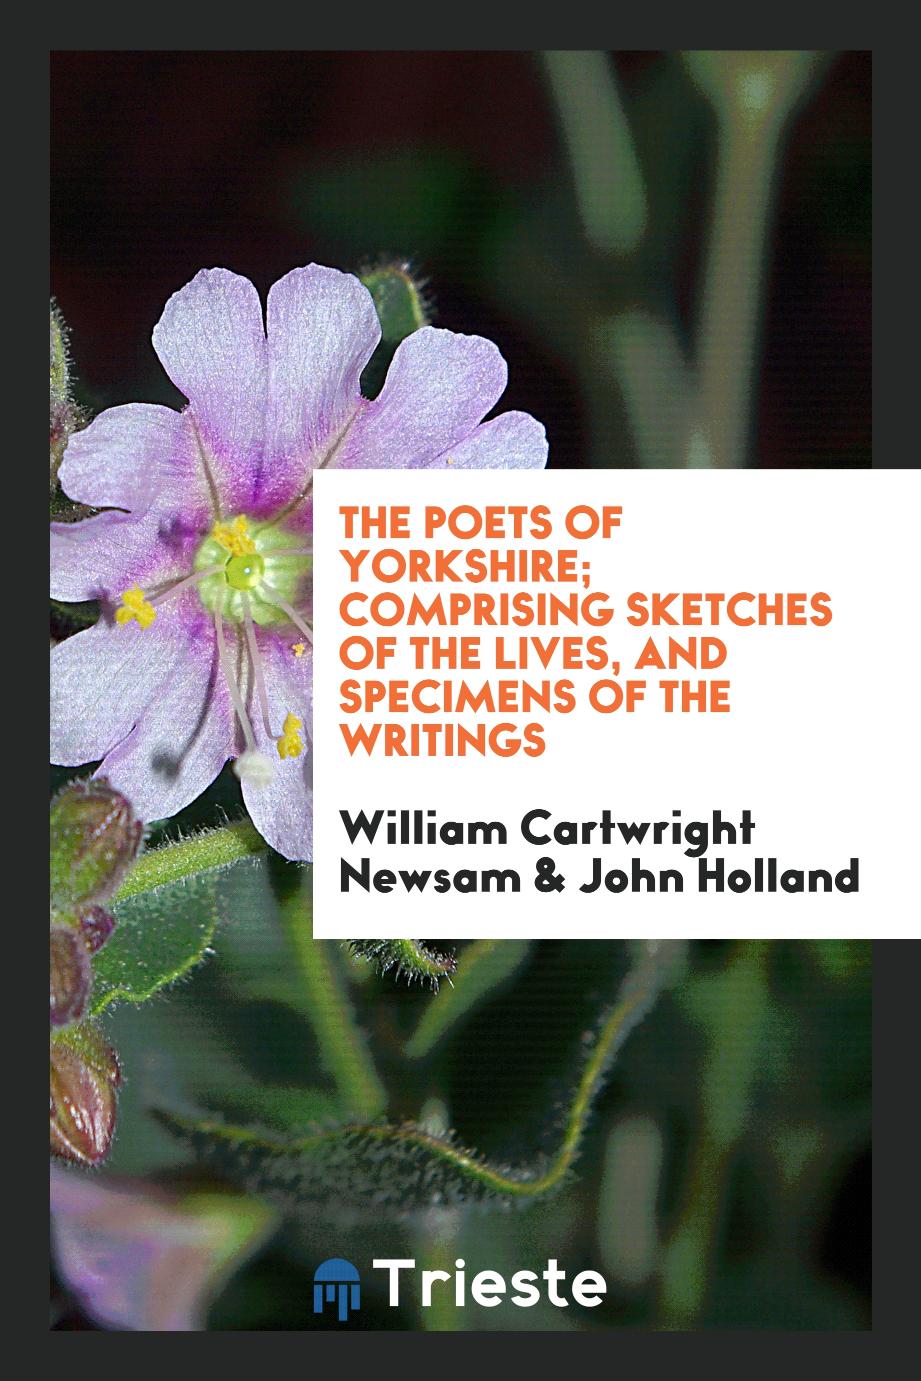 William Cartwright  Newsam, John Holland - The Poets of Yorkshire; Comprising Sketches of the Lives, and Specimens of the Writings